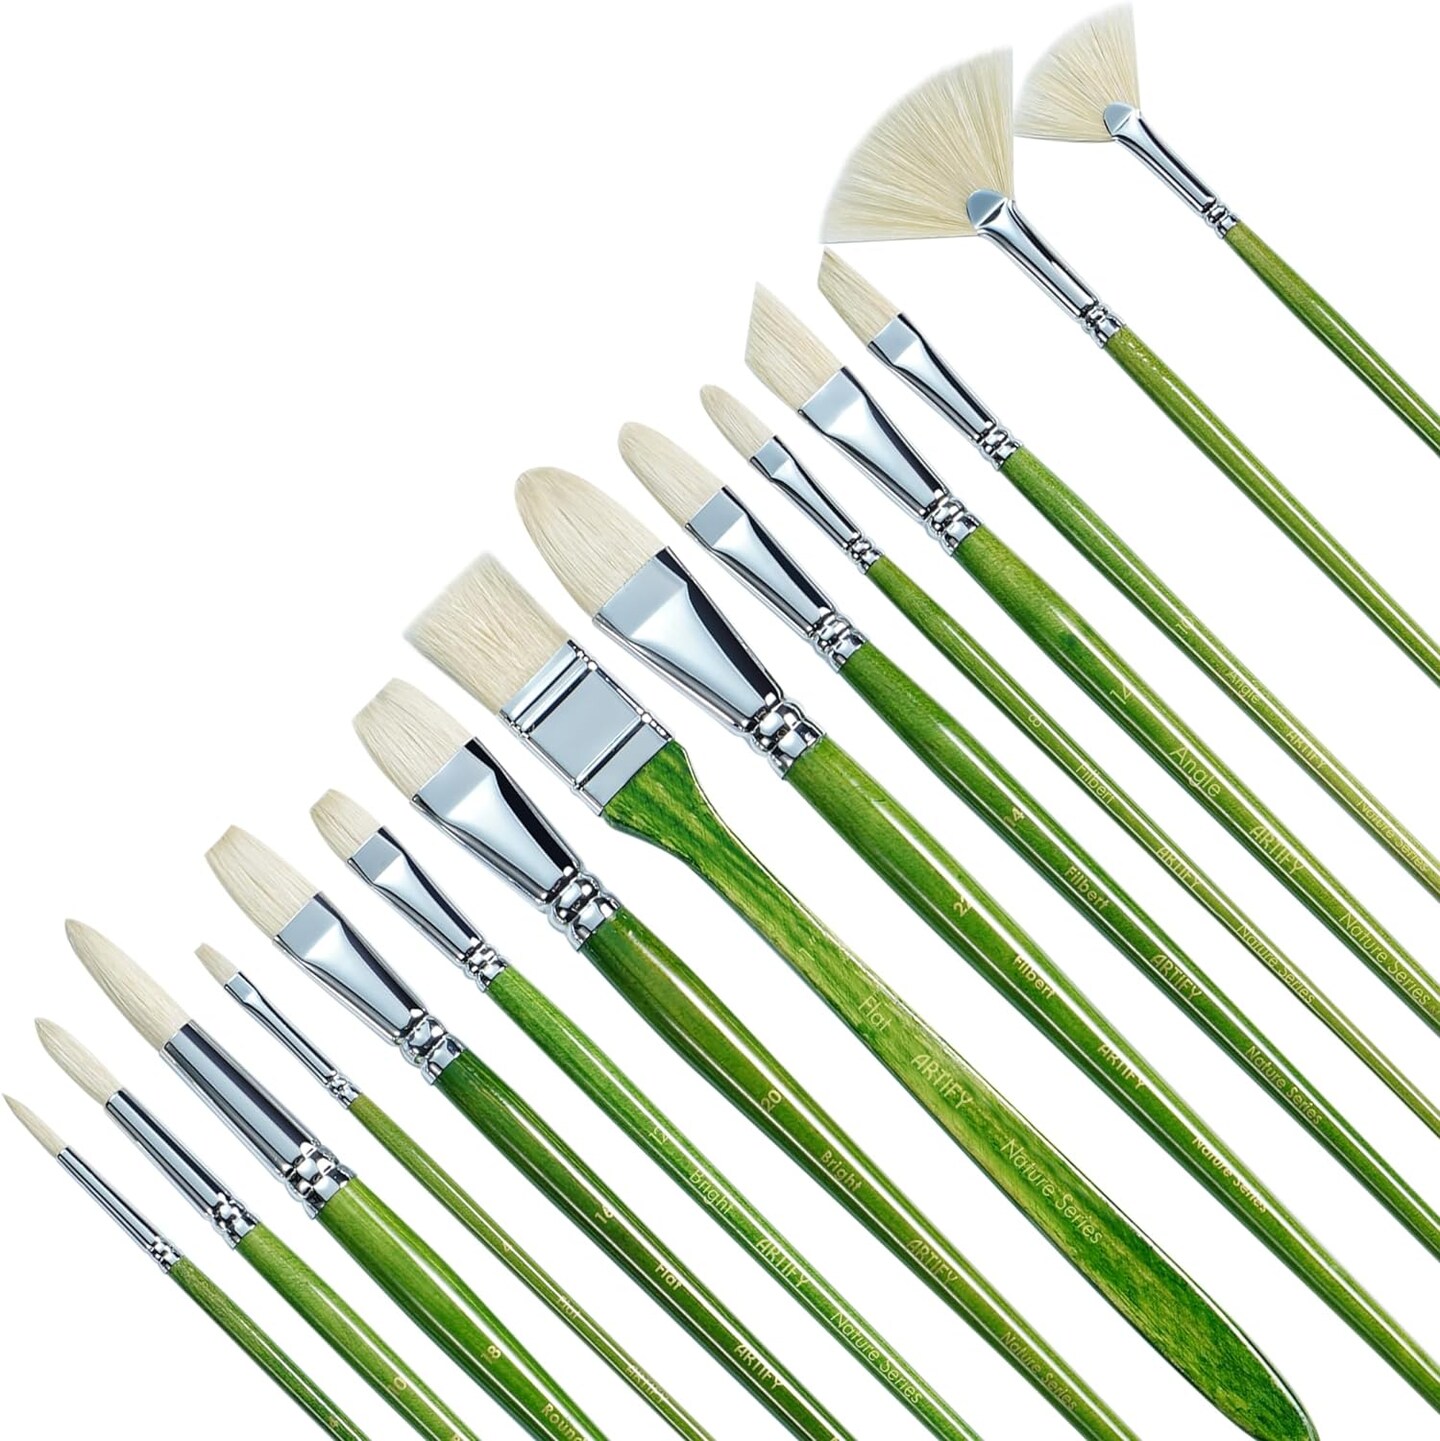 ARTIFY Oil Paint Brushes Set, Acrylic Paint Brushes with Long and Heavy Handle, 15 Pcs Professional Natural Chungking Bristle Paintbrush Set, for Oil and Acrylic Gouache Painting, Green